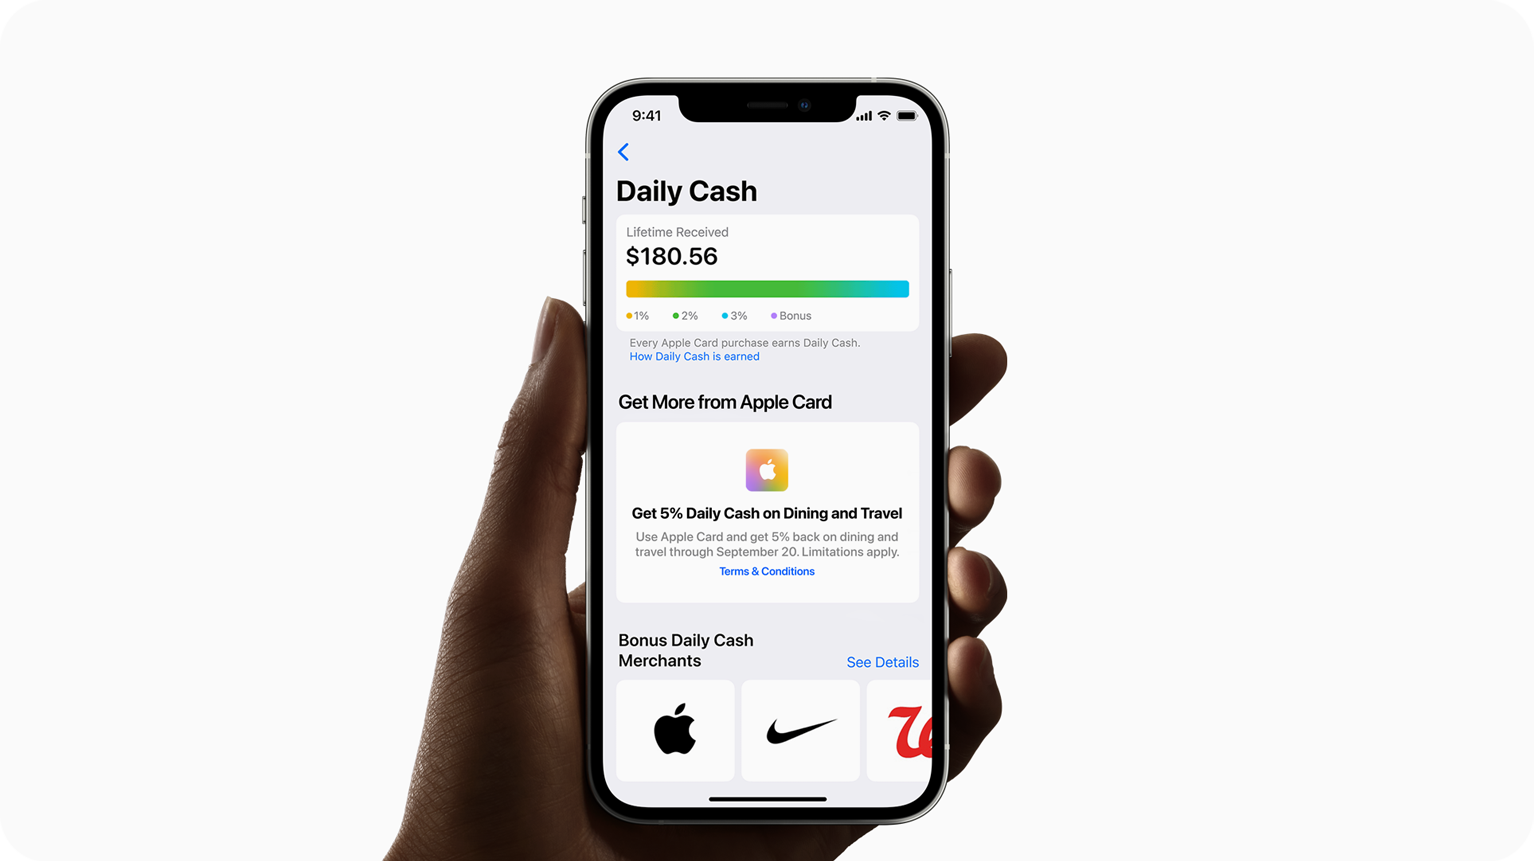 Apple gift card deals: Get a $10 bonus with this special promo